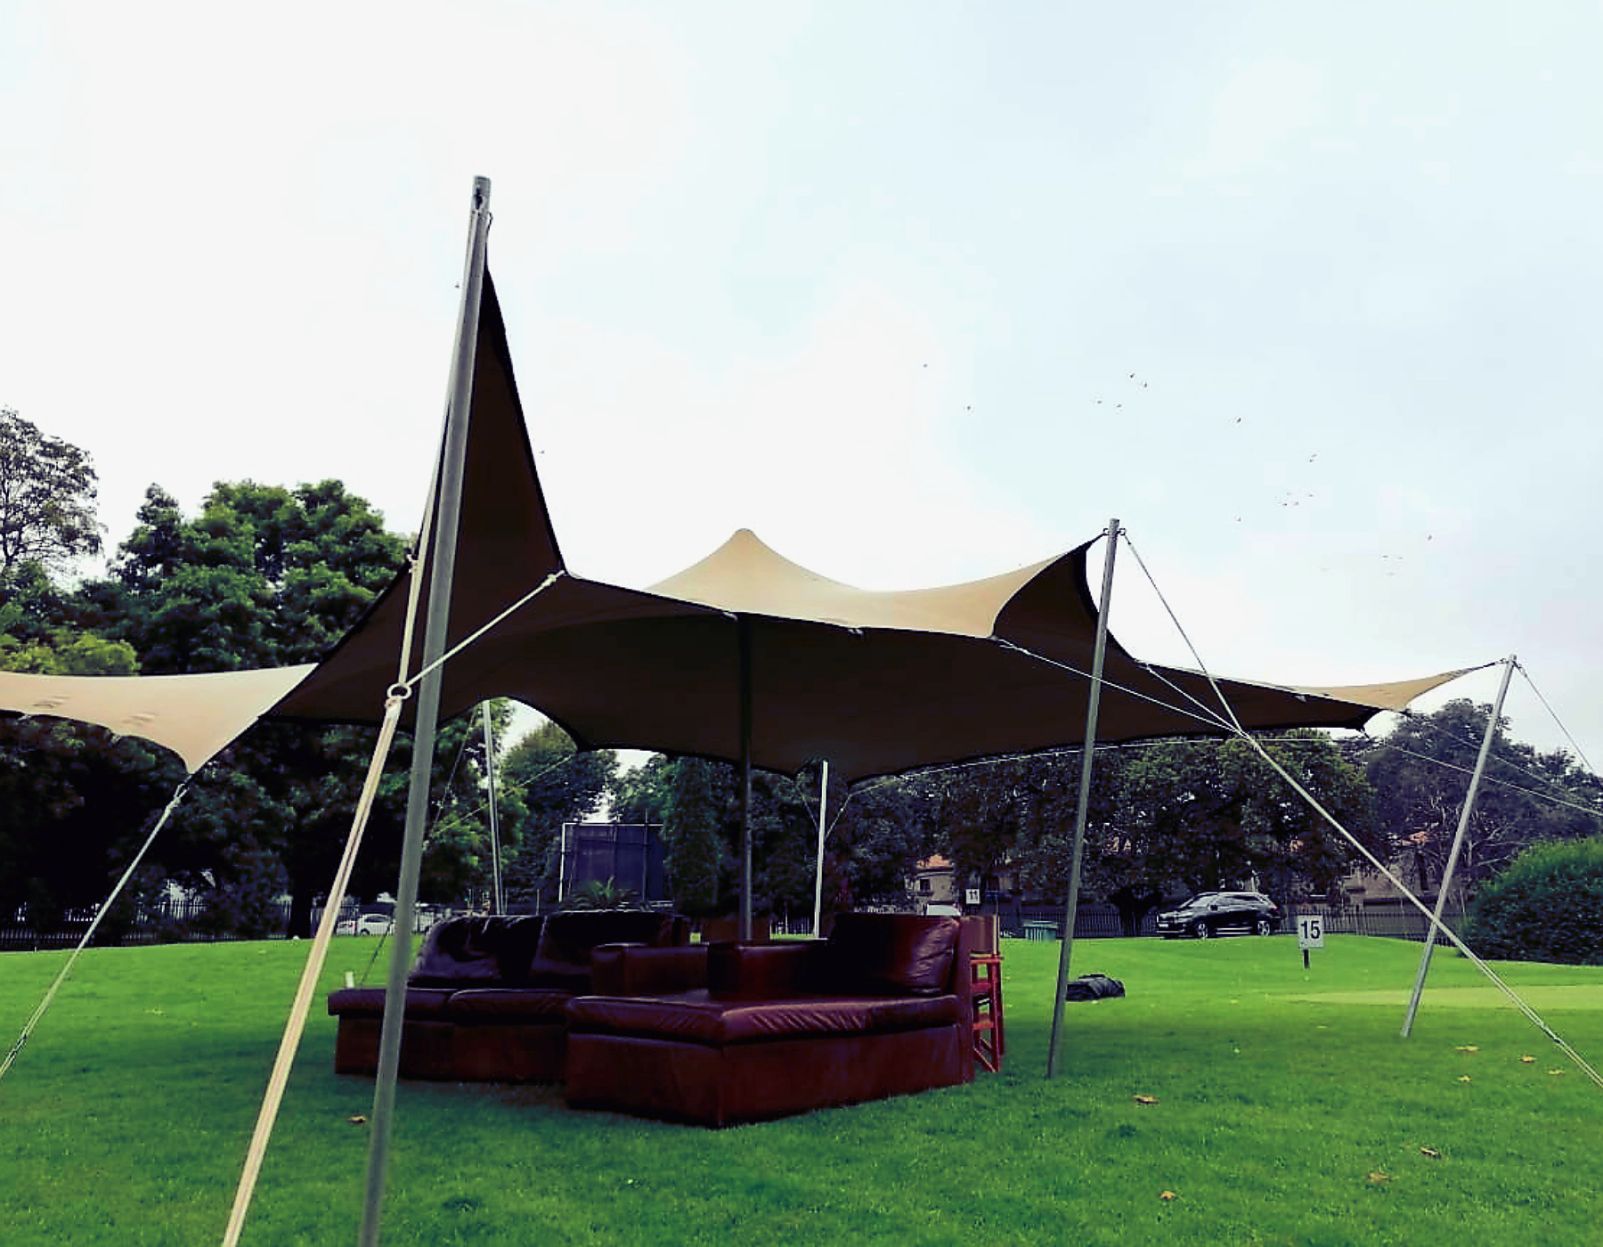 Bedouin Tent on Green Grass With Two Brown Leather Couches Underneath.